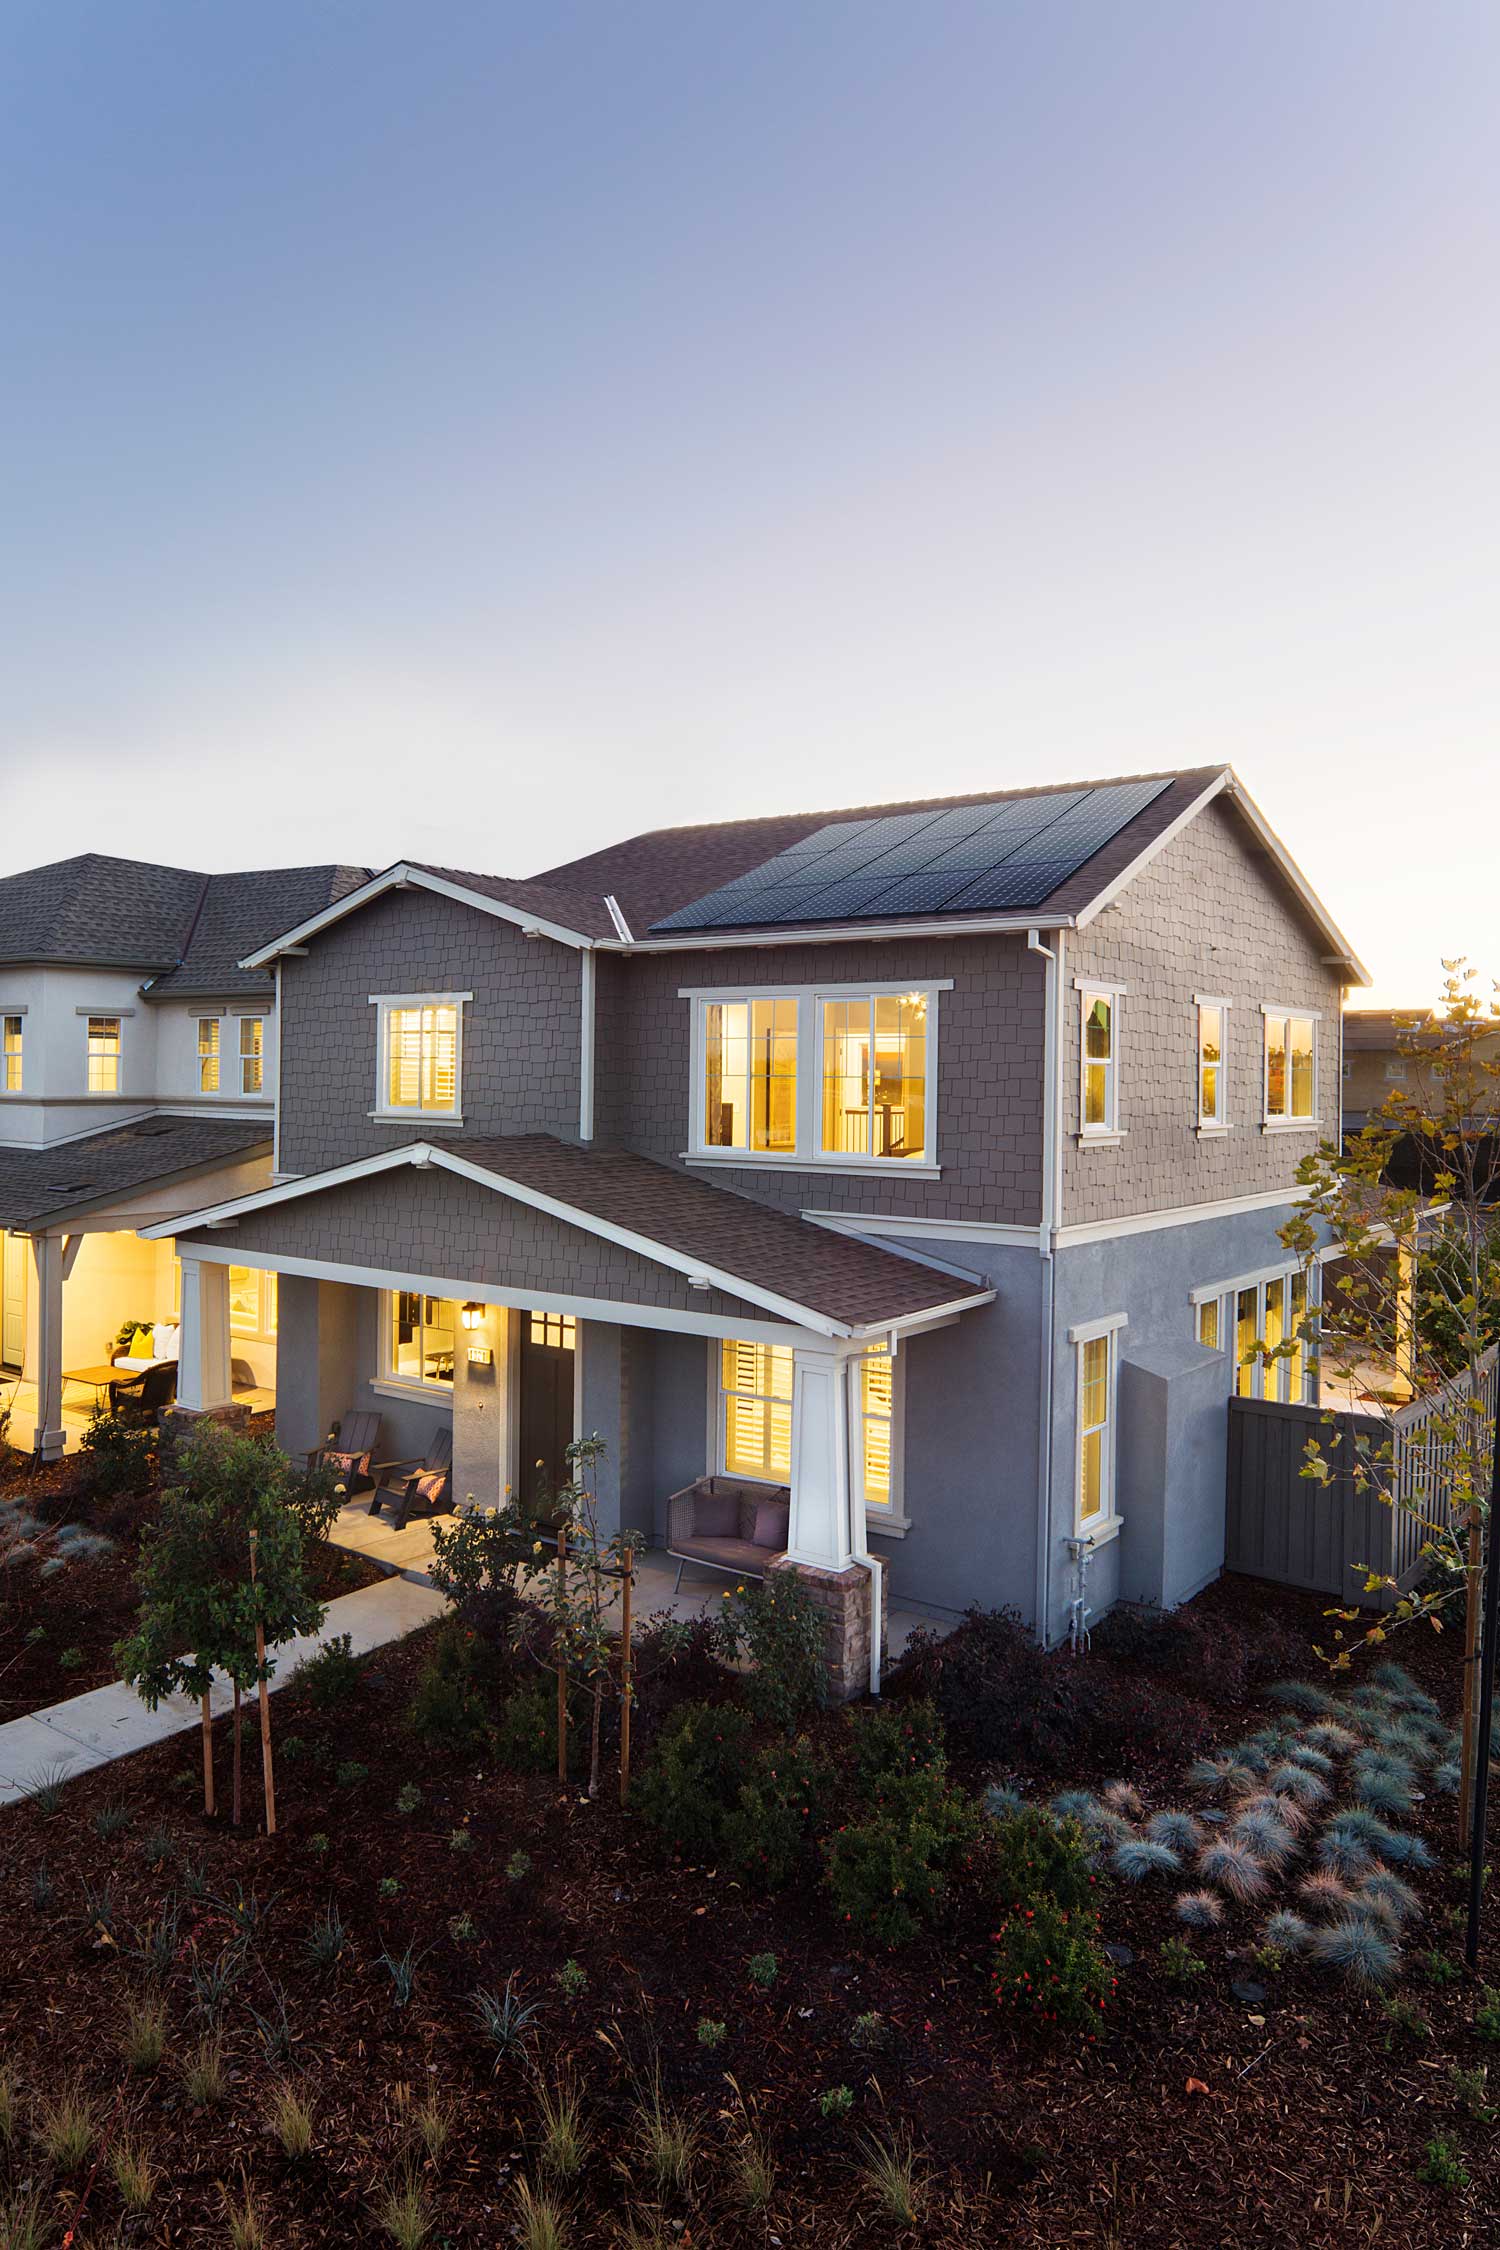 A grey house at dusk with lighting generating power from their solar panels, Greenville solar company.